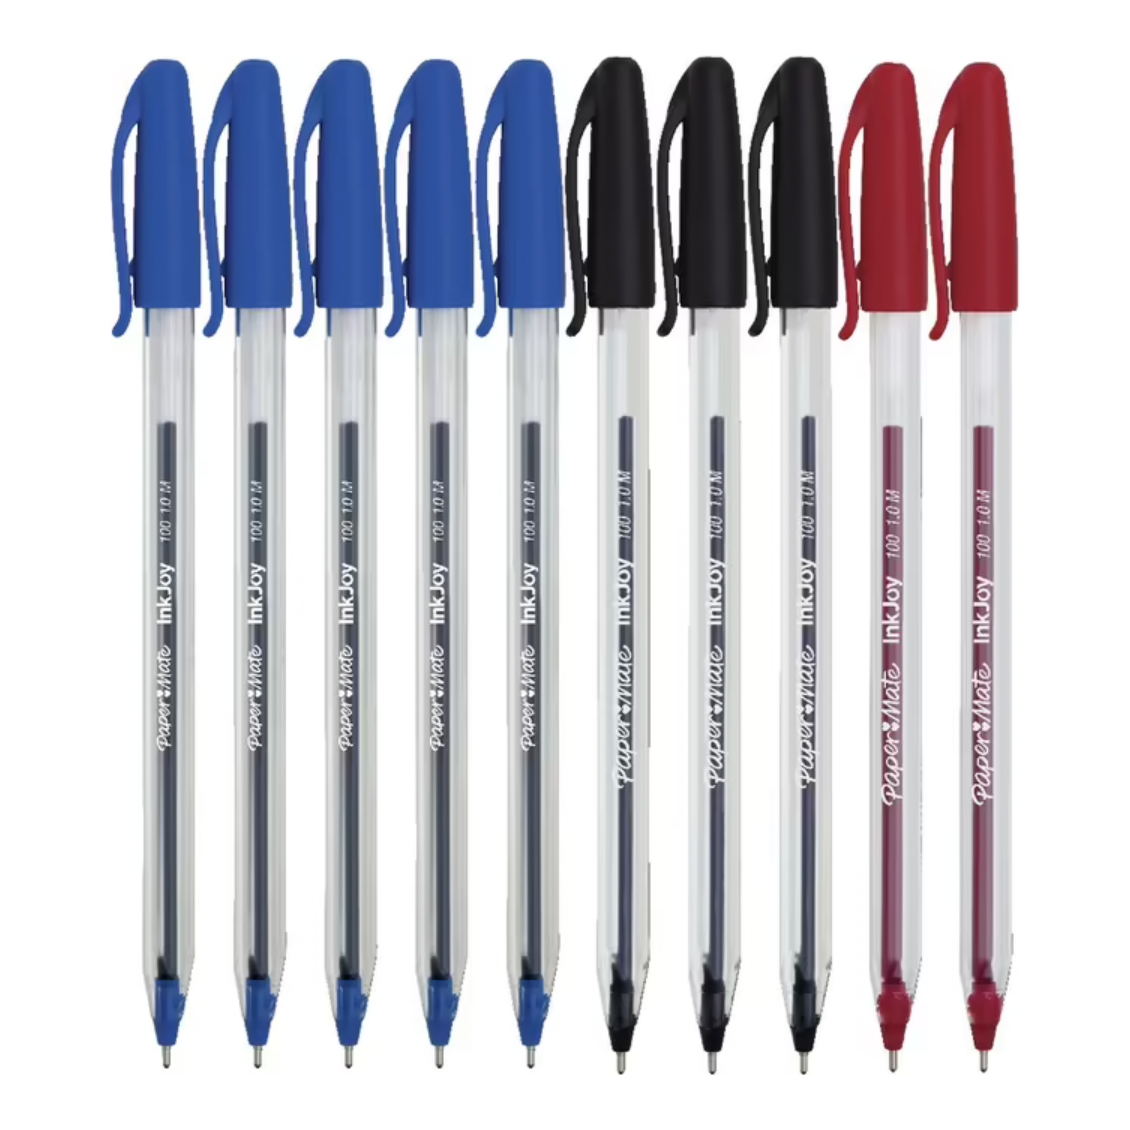 PaperMate InkJoy Ballpoint Pens (10 Pack Assorted)